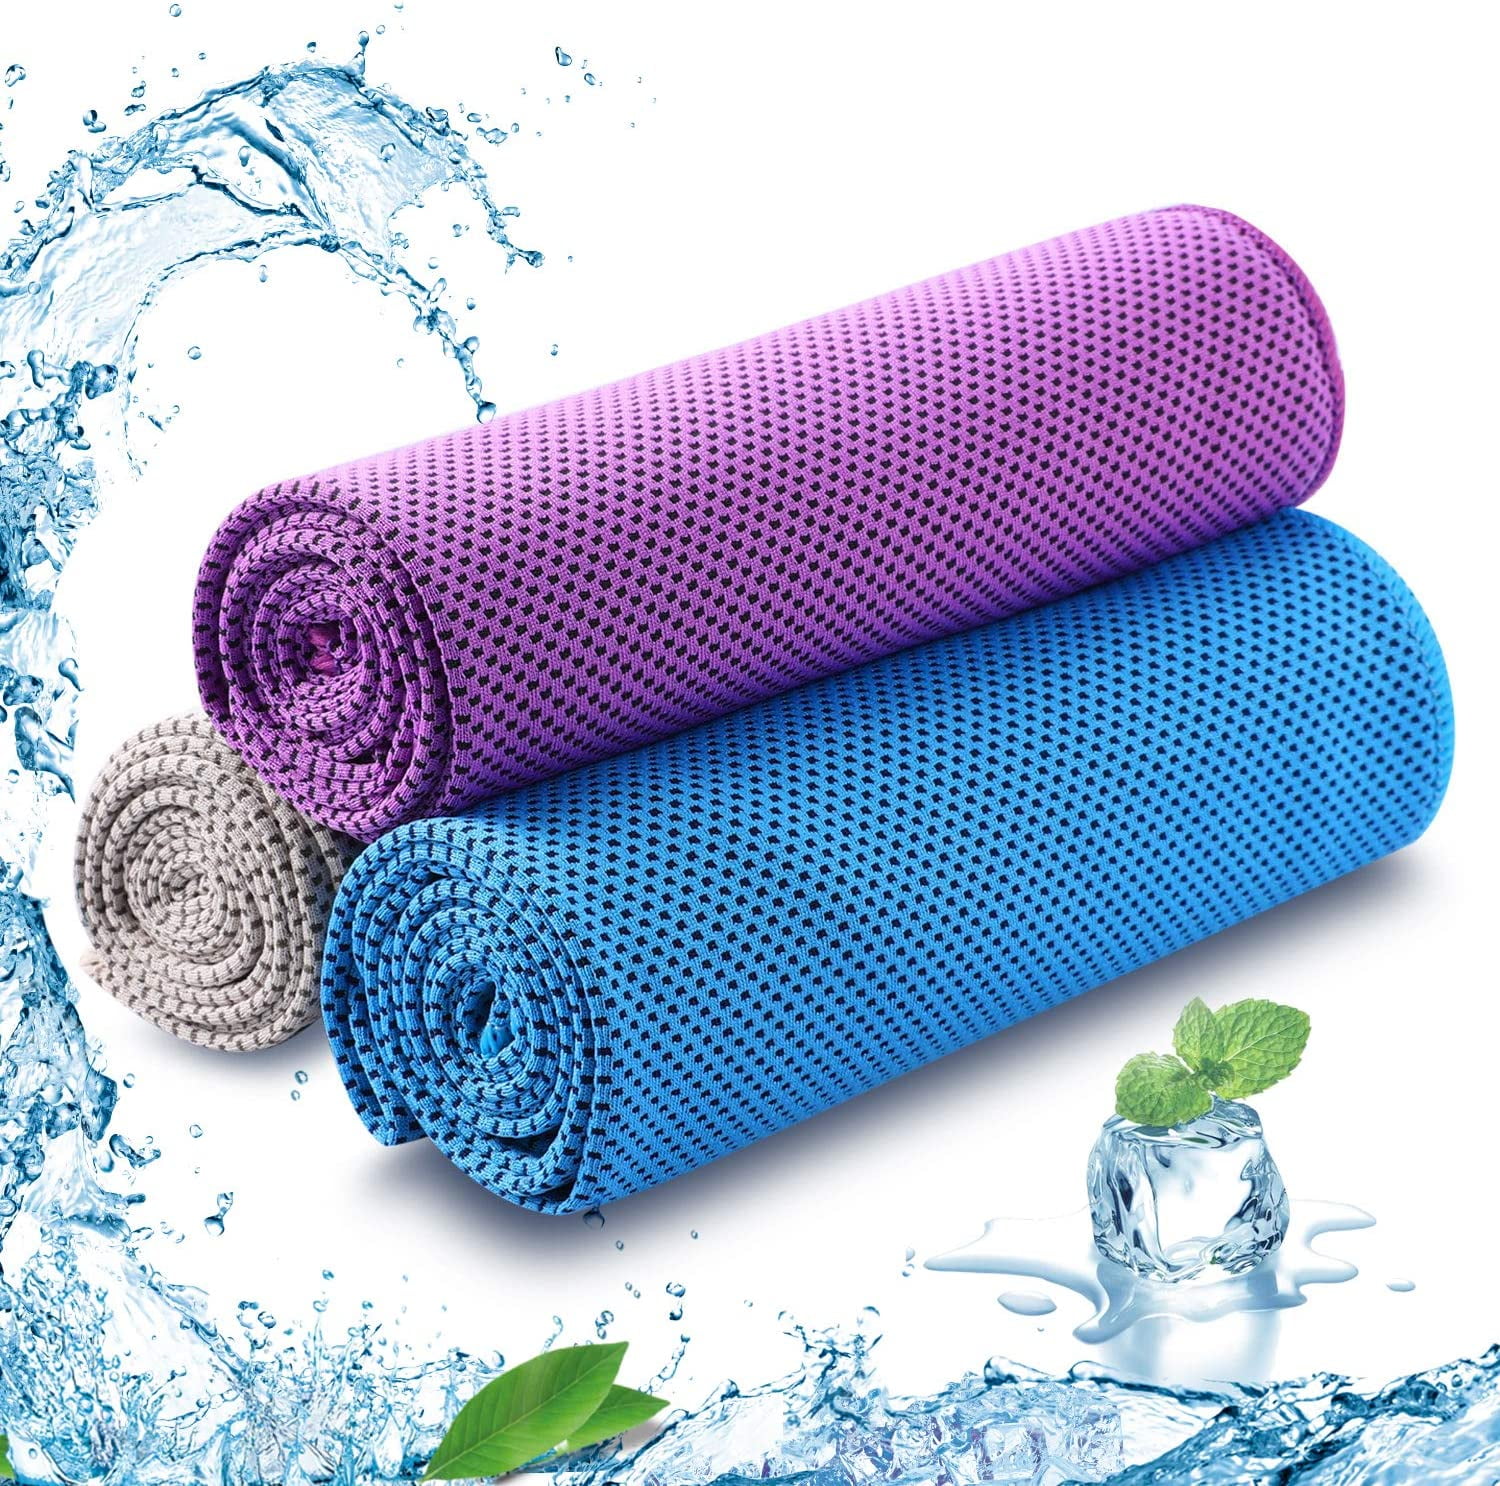 Cool Snap Ice Towel Gym Fitness Sports Cycling Running Jogging Fever Dog Walk 